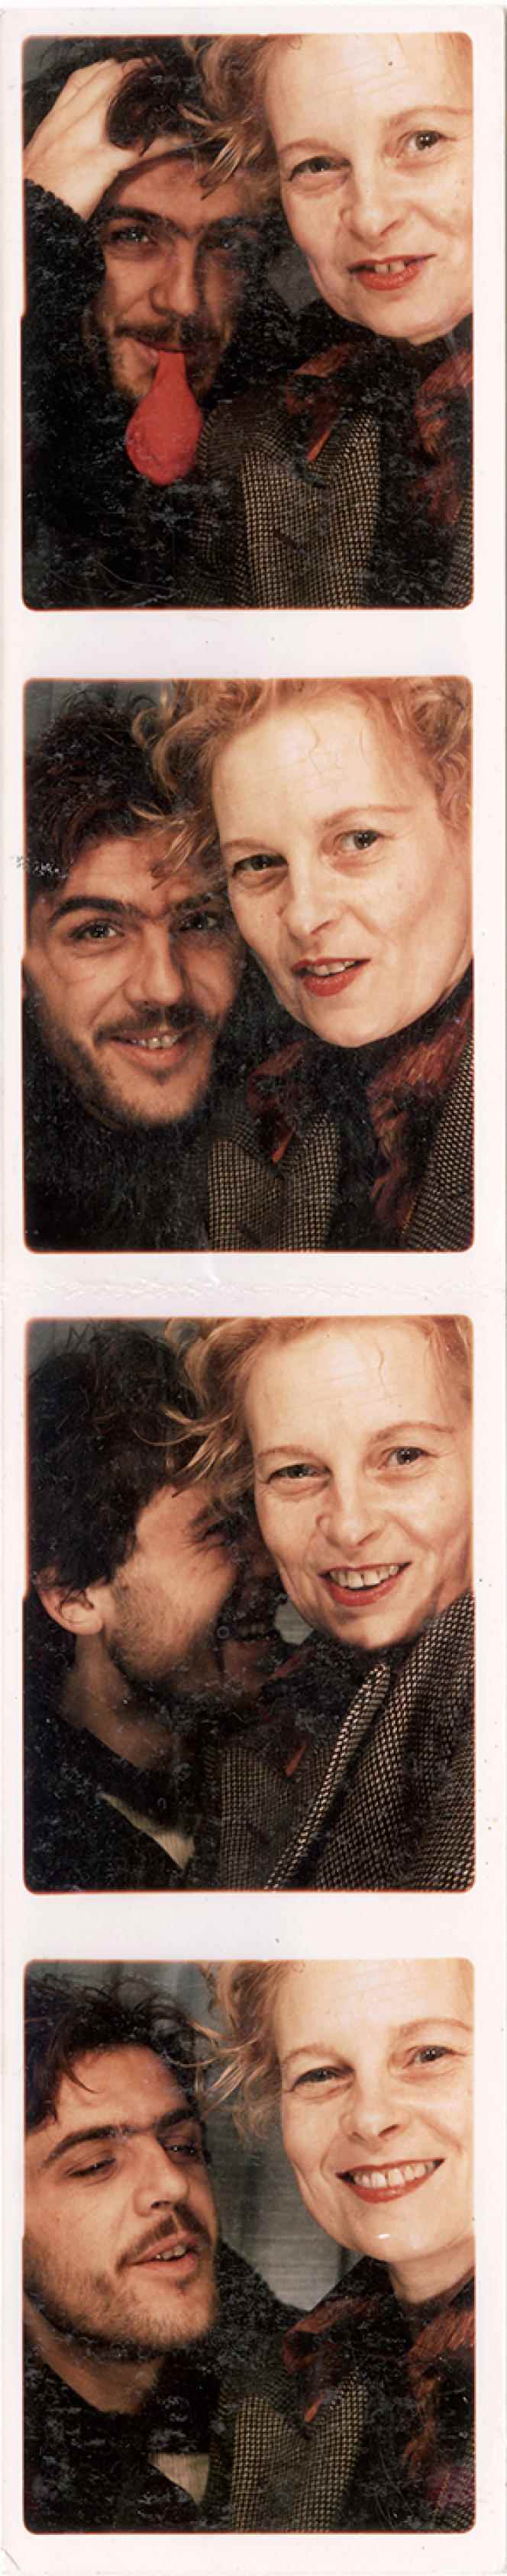 Andreas Kronthaler and Vivienne Westwood, in 1988 or 1989.